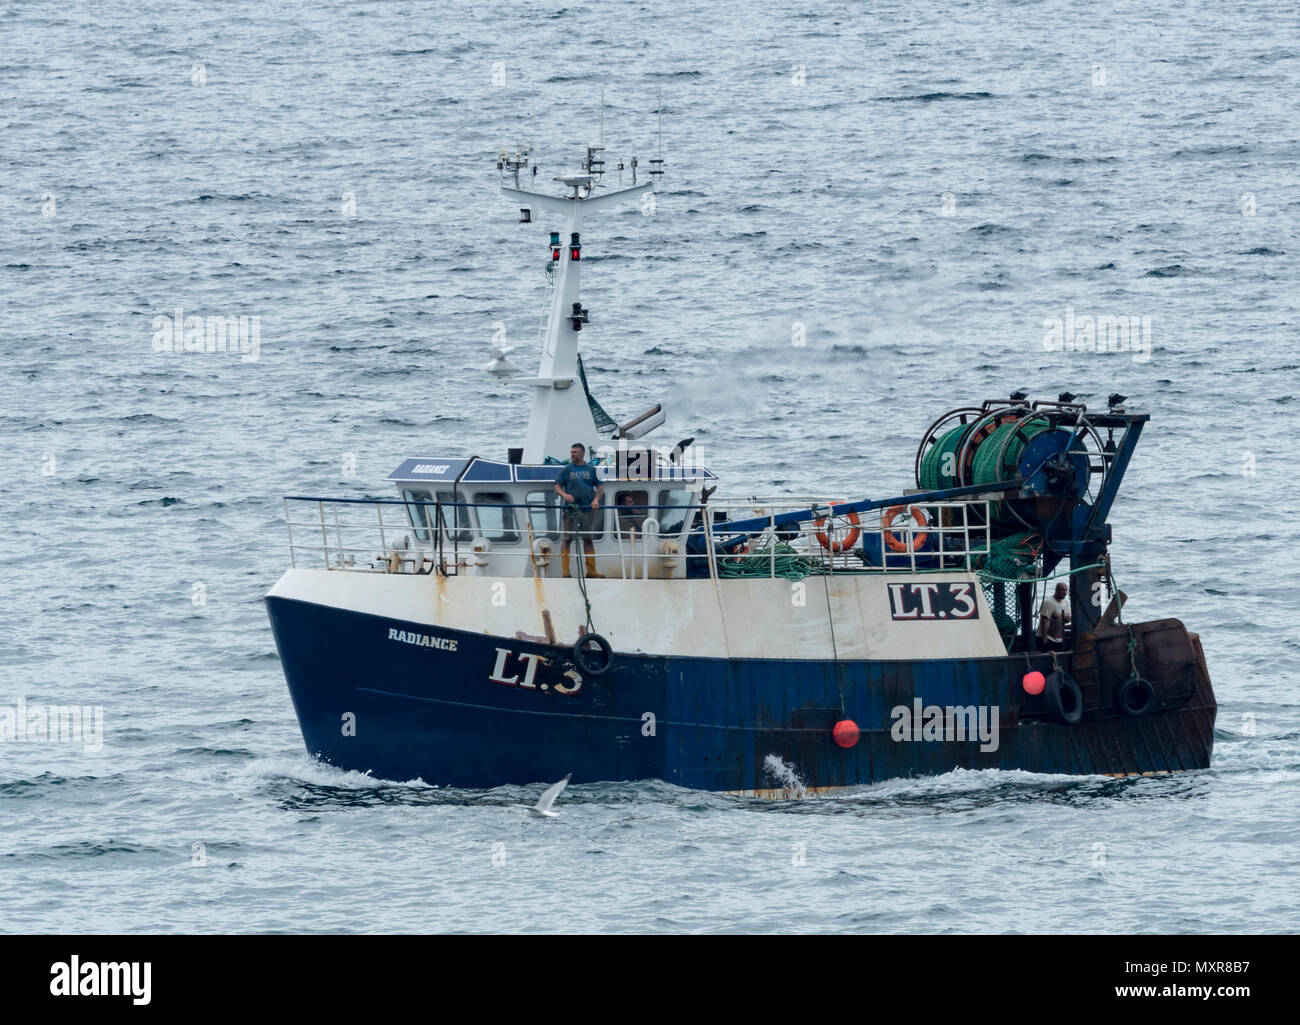 Fishing boat 'Radiance' LT3, returning to Newlyn harbour Stock Photo